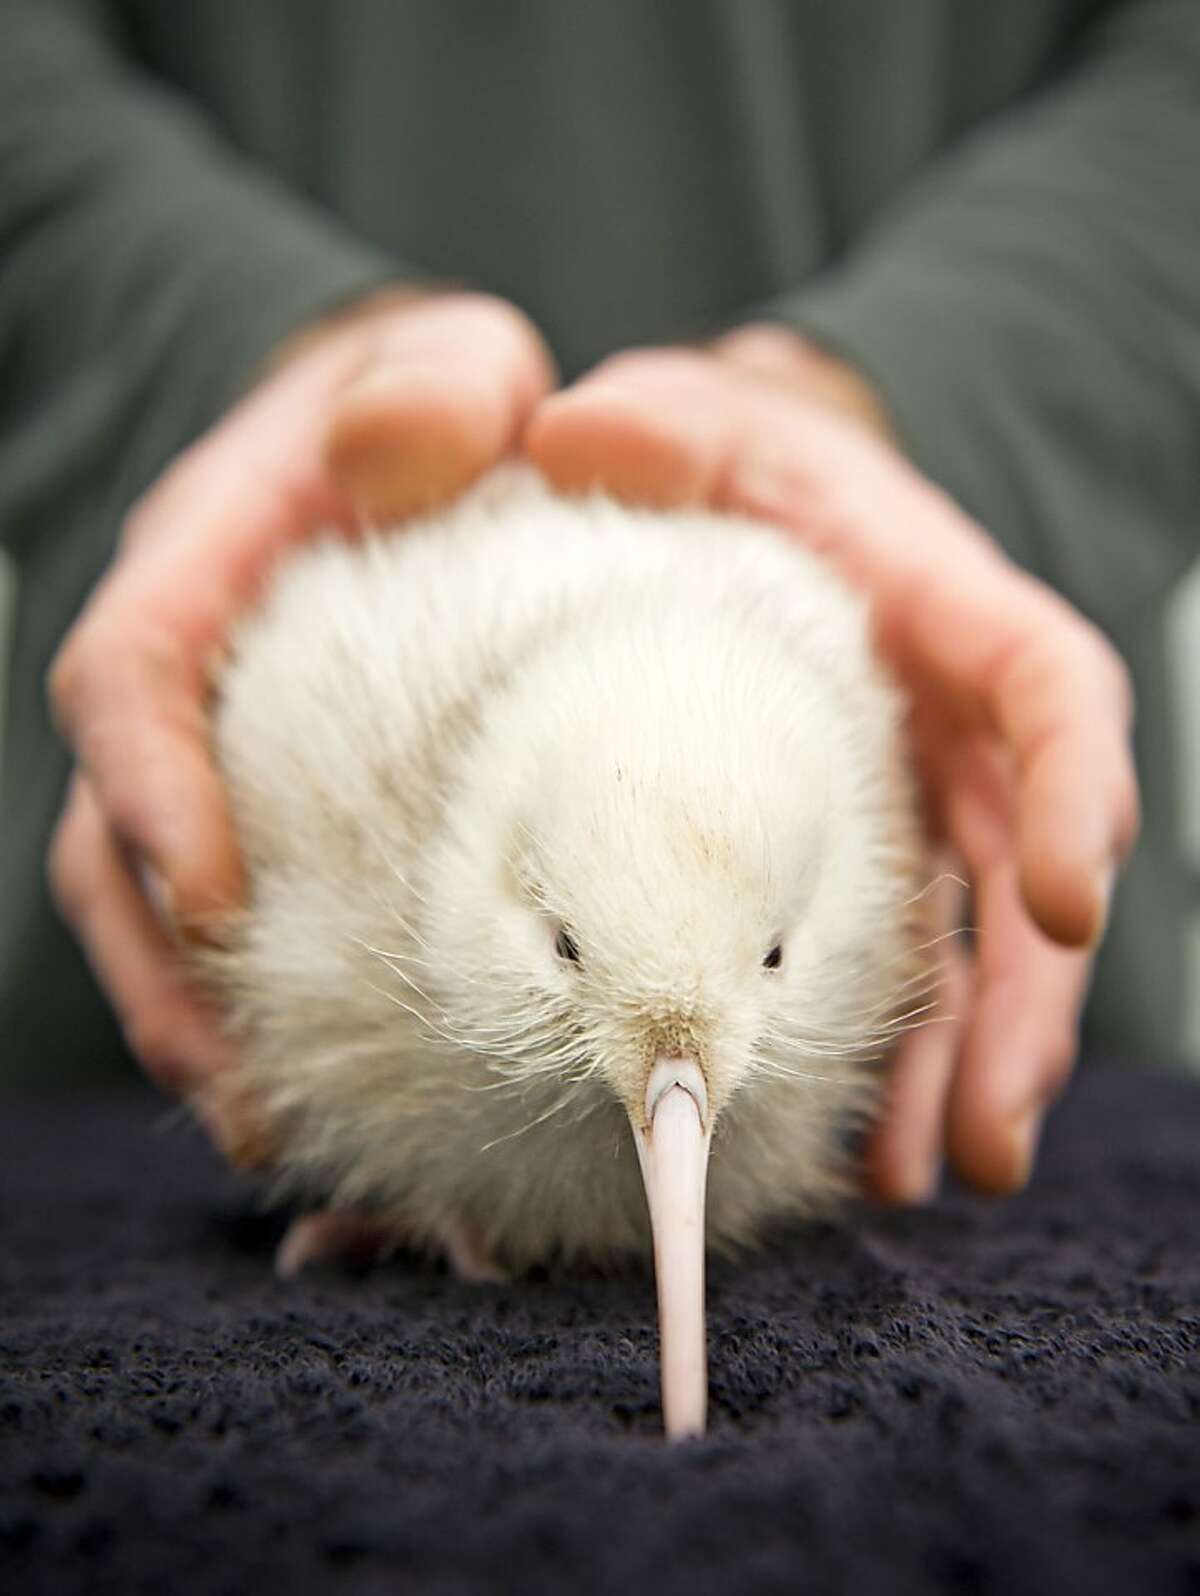 In this May 22, 2011 photo provided by the Pukaha Mount Bruce National Wildlife Centre Thursday, May 26, 2011, a rare white kiwi chick is seen three weeks after it hatched on May 1 in Wellington, New Zealand. The all-white kiwi, named 'Manukura' is believed to be the first white chick born in captivity. Kiwis are normally brown in color. Manukura is the thirteenth of fourteen kiwi chicks hatched at the wildlife center this season.